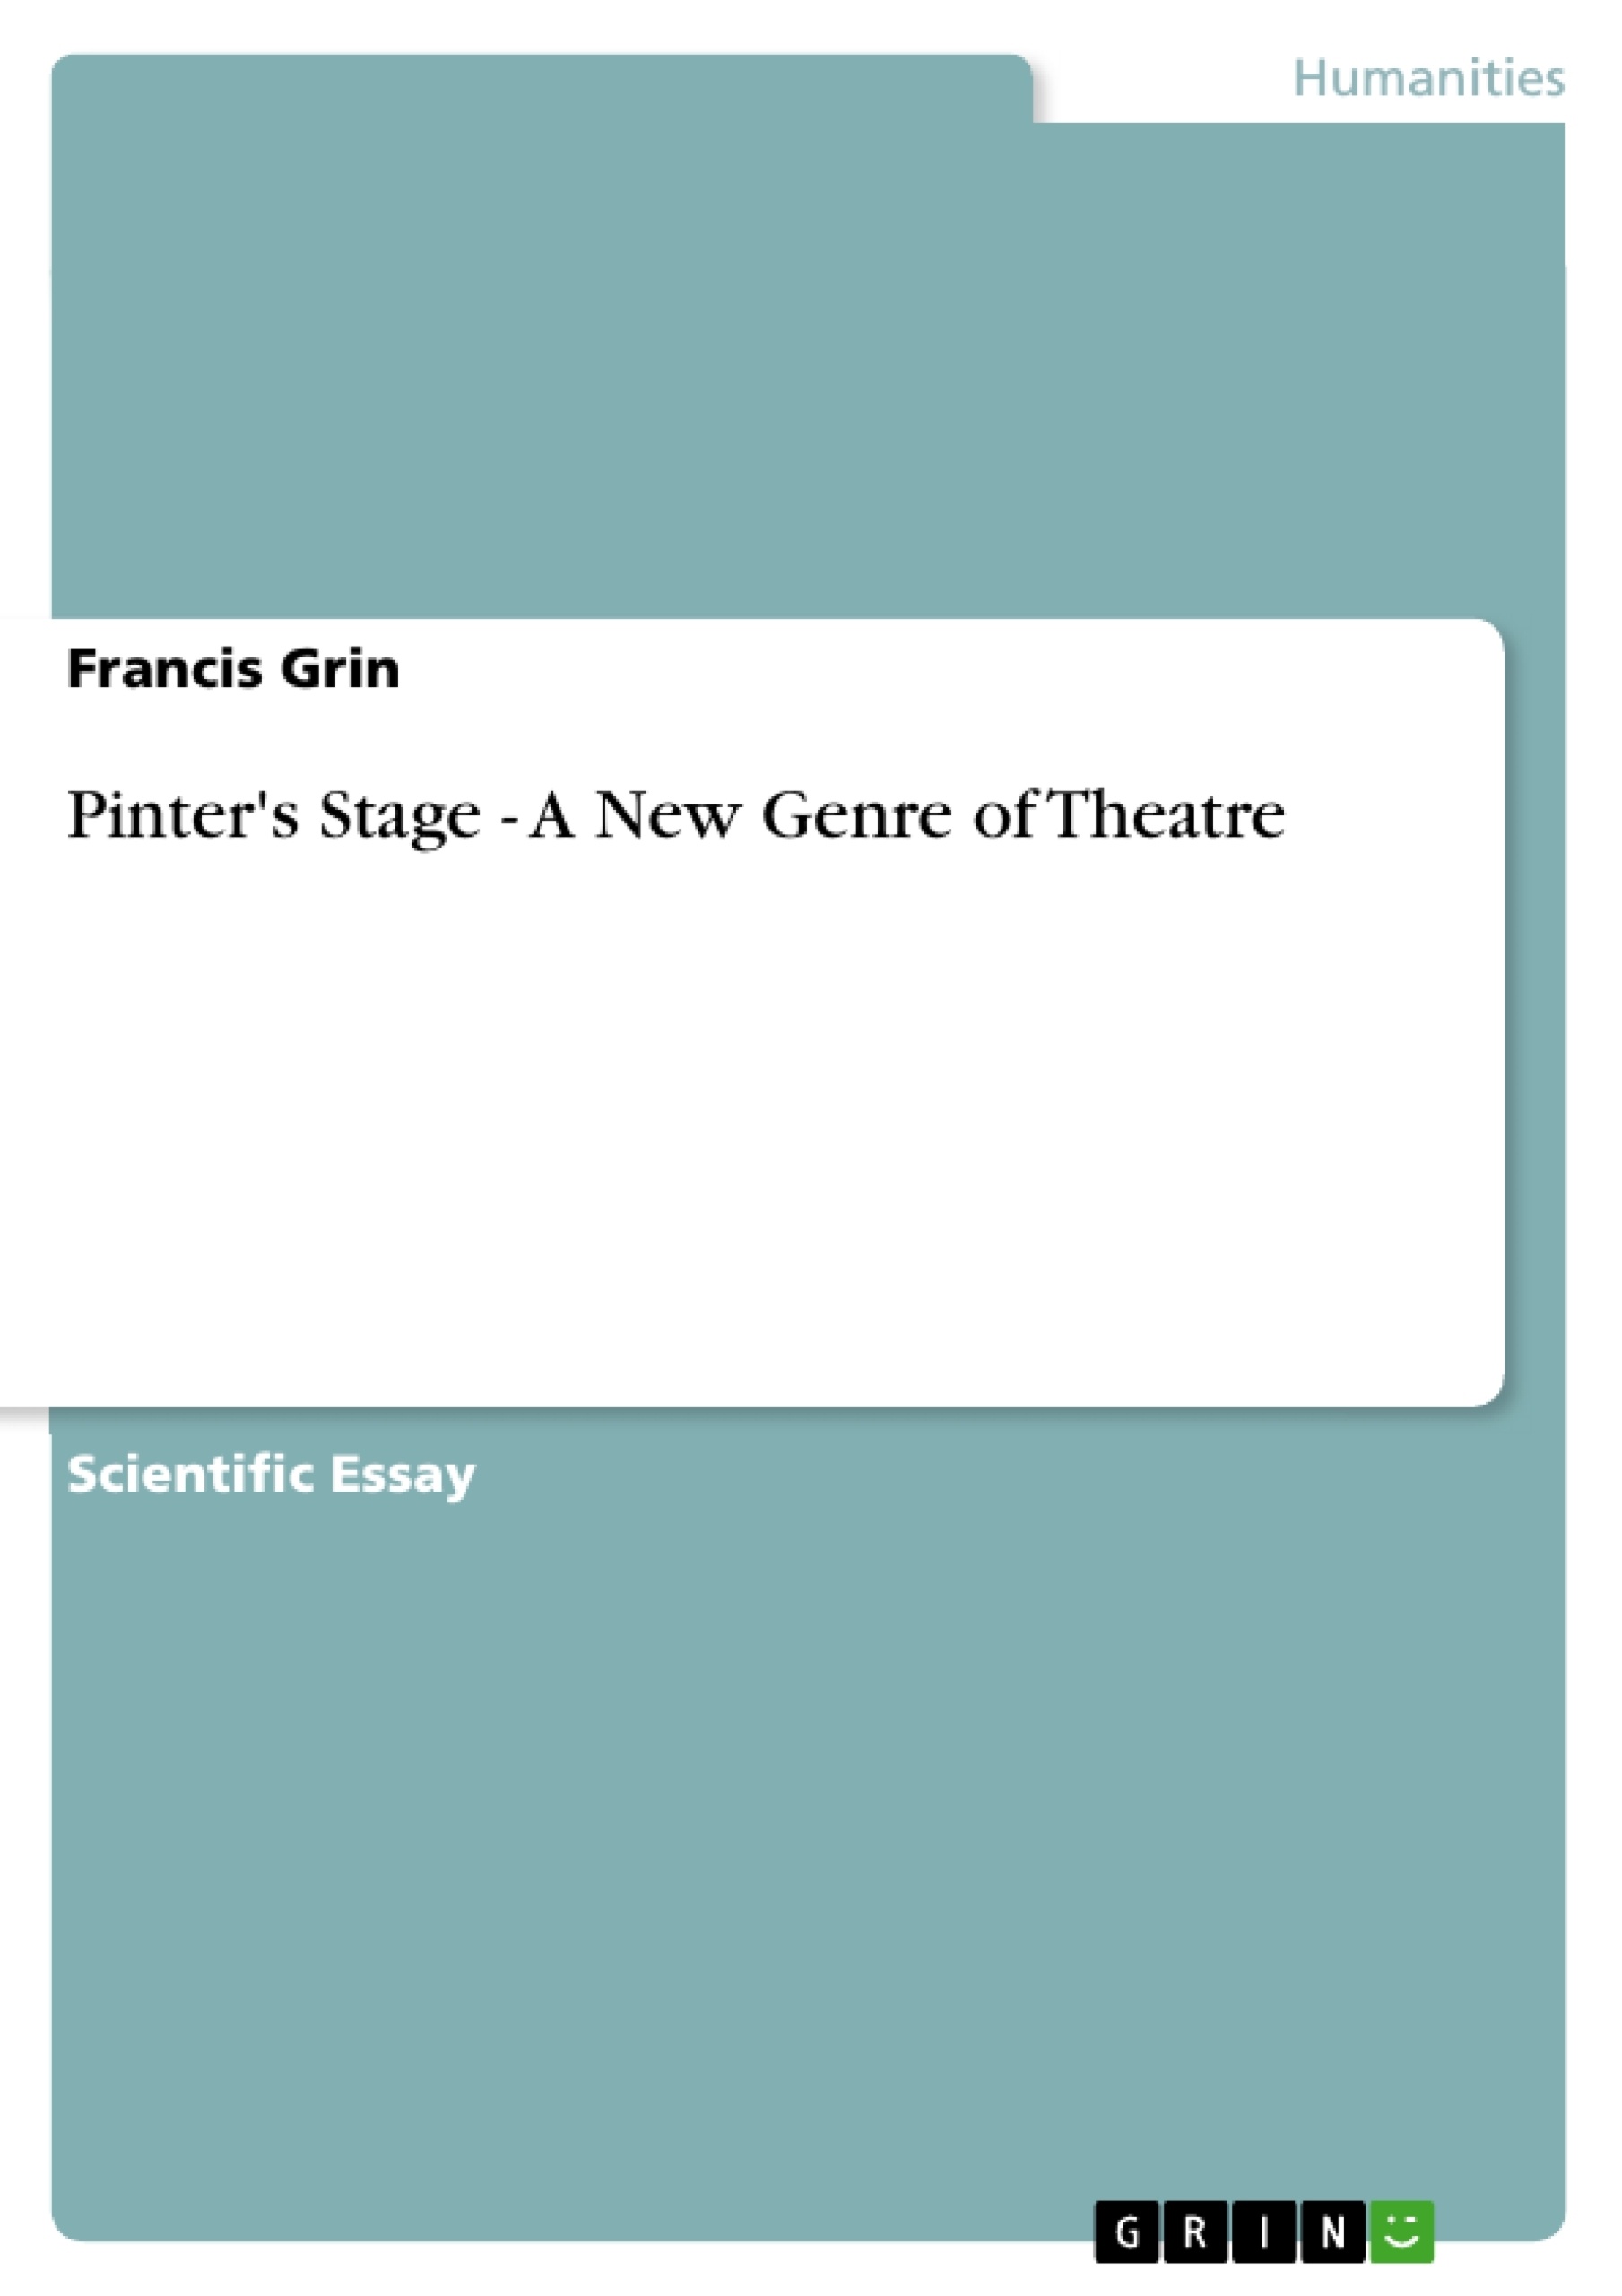 Title: Pinter's Stage - A New Genre of Theatre